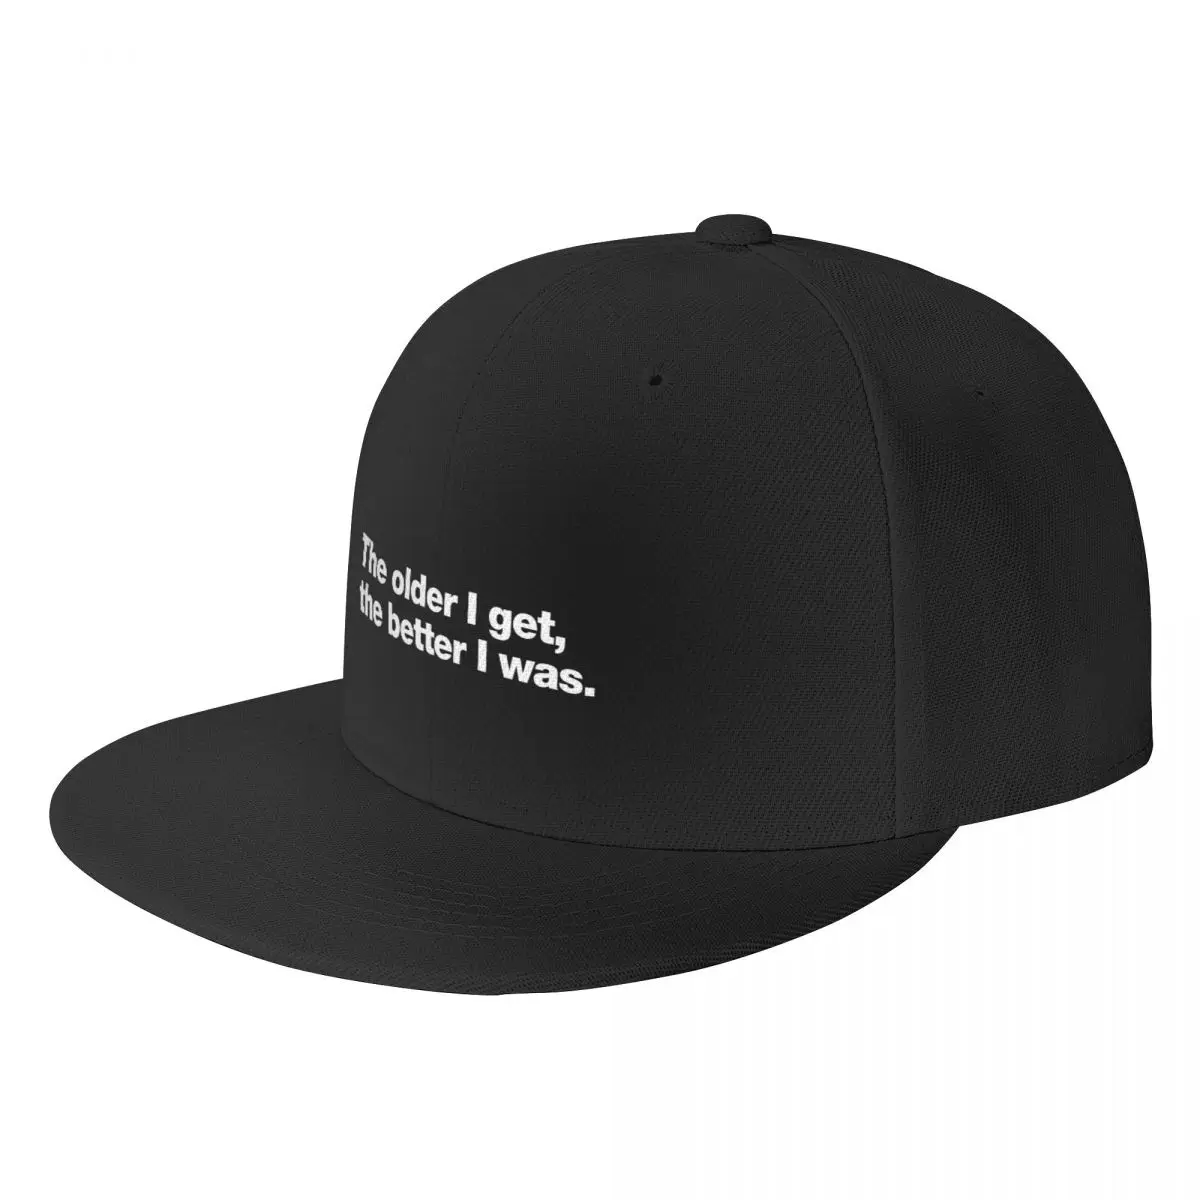 

The older I get, the better I was. Baseball Cap Horse Hat cute Woman Hat Men's